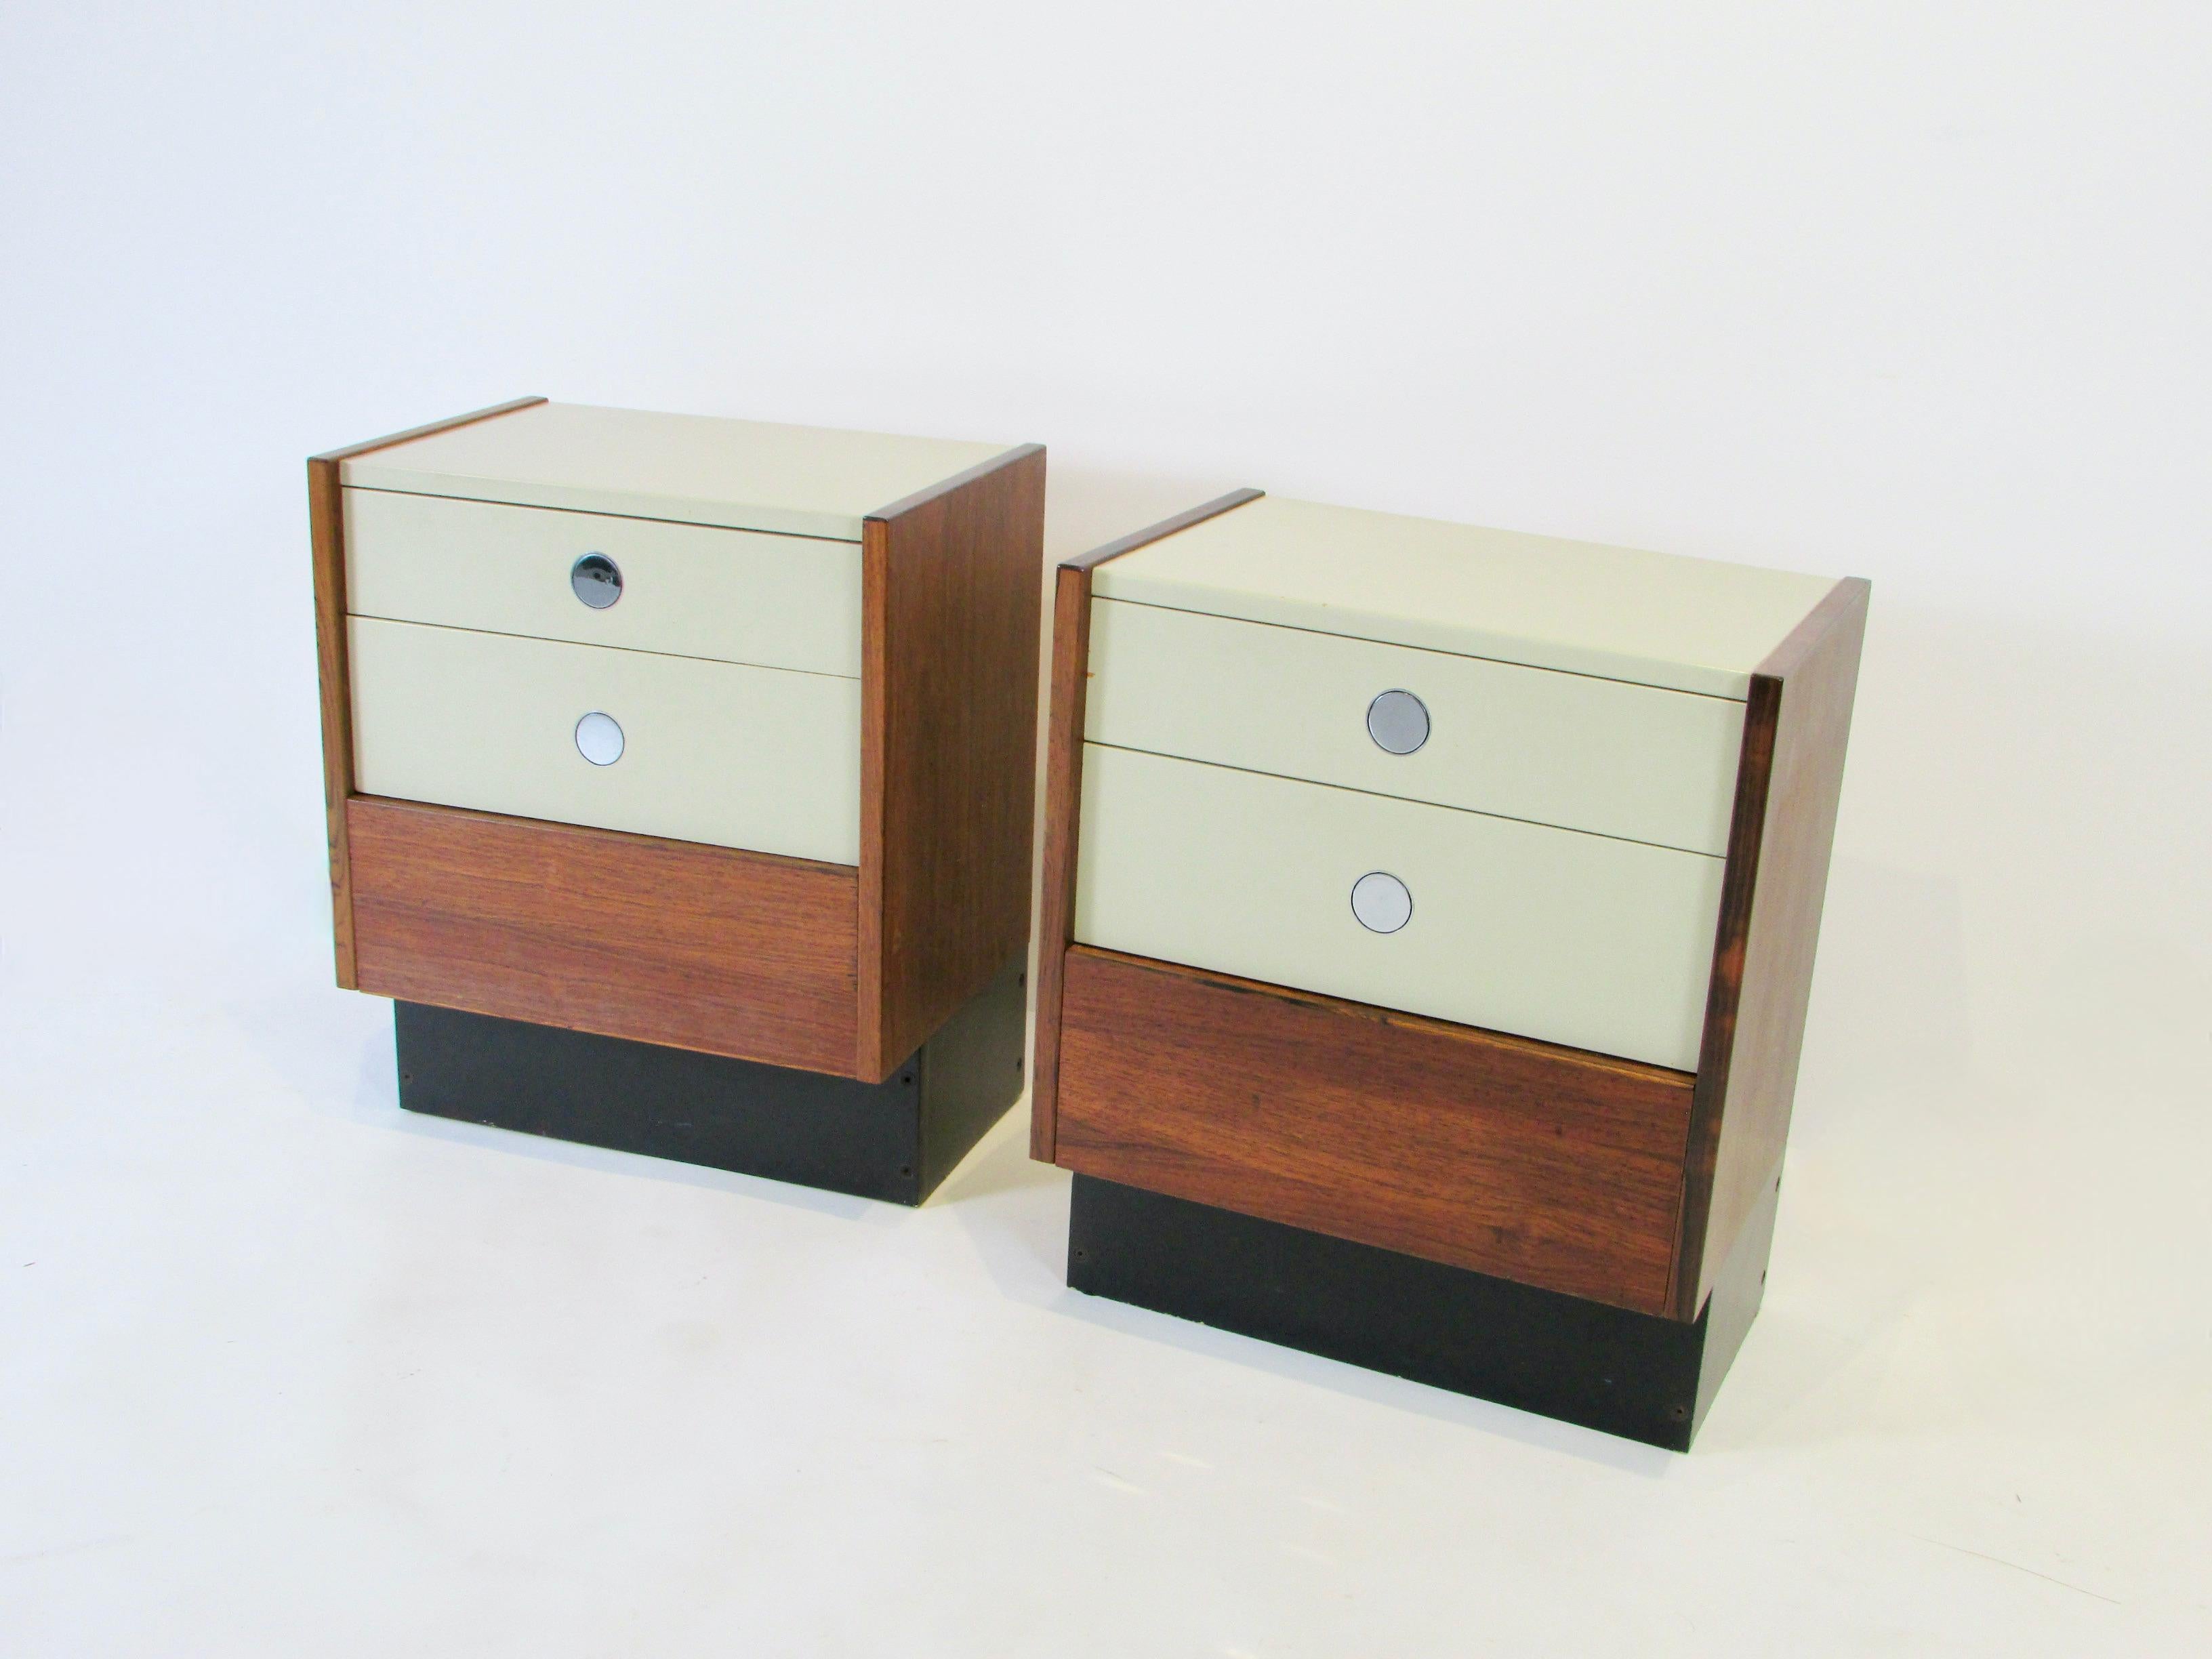 Drylund of Denmark bed side tables or night stands. Pair of rosewood cabinets hold lacquered drawers with chrome disc pulls.